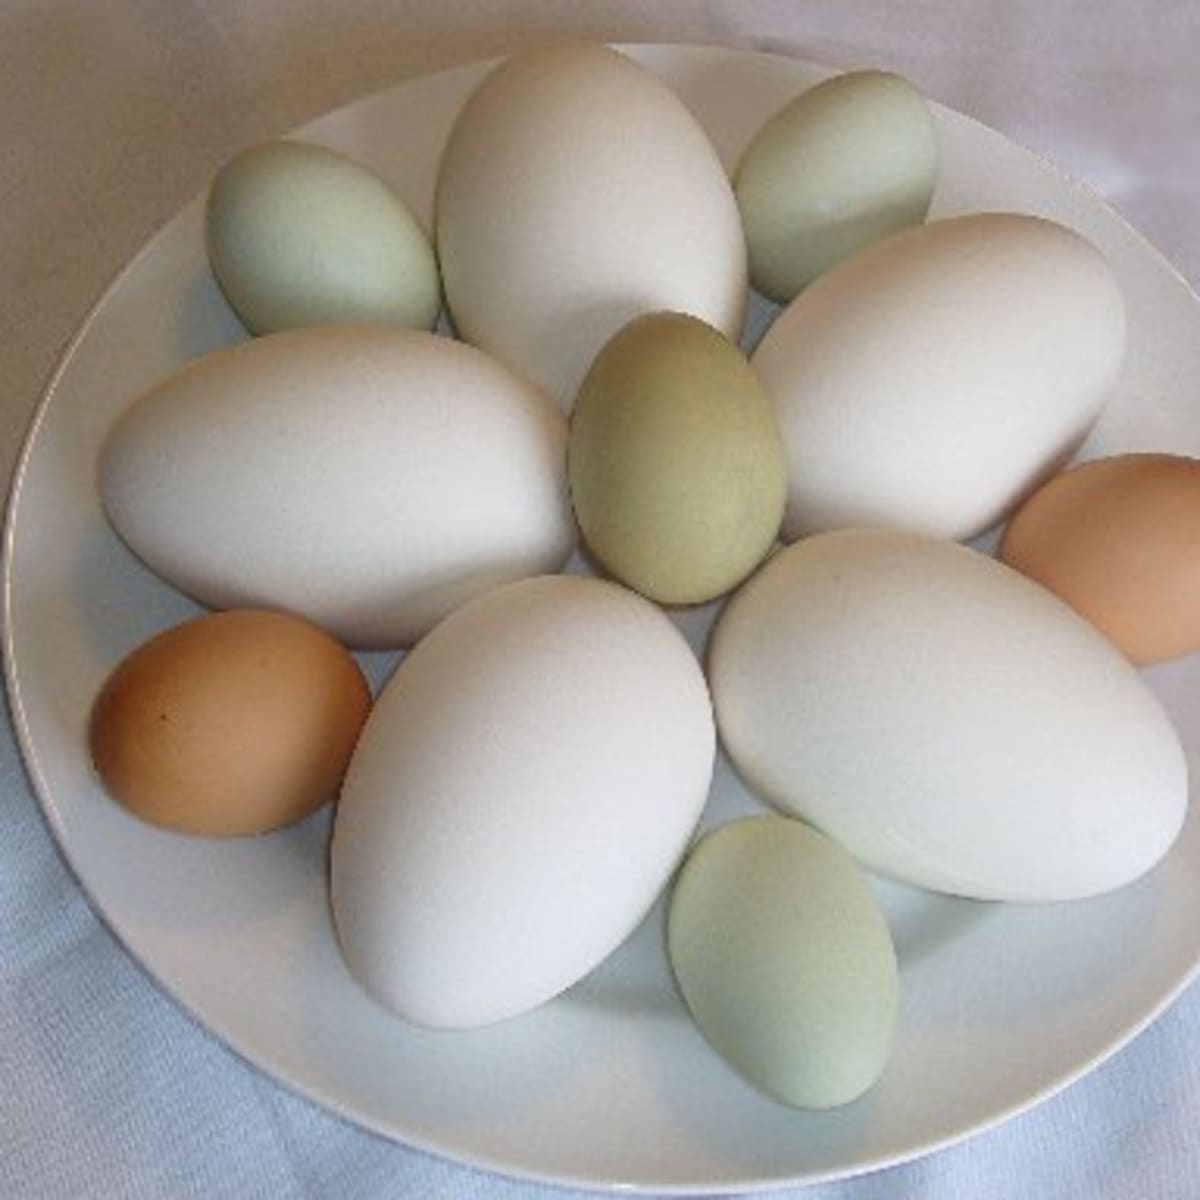 Storing and Preserving Chicken Eggs